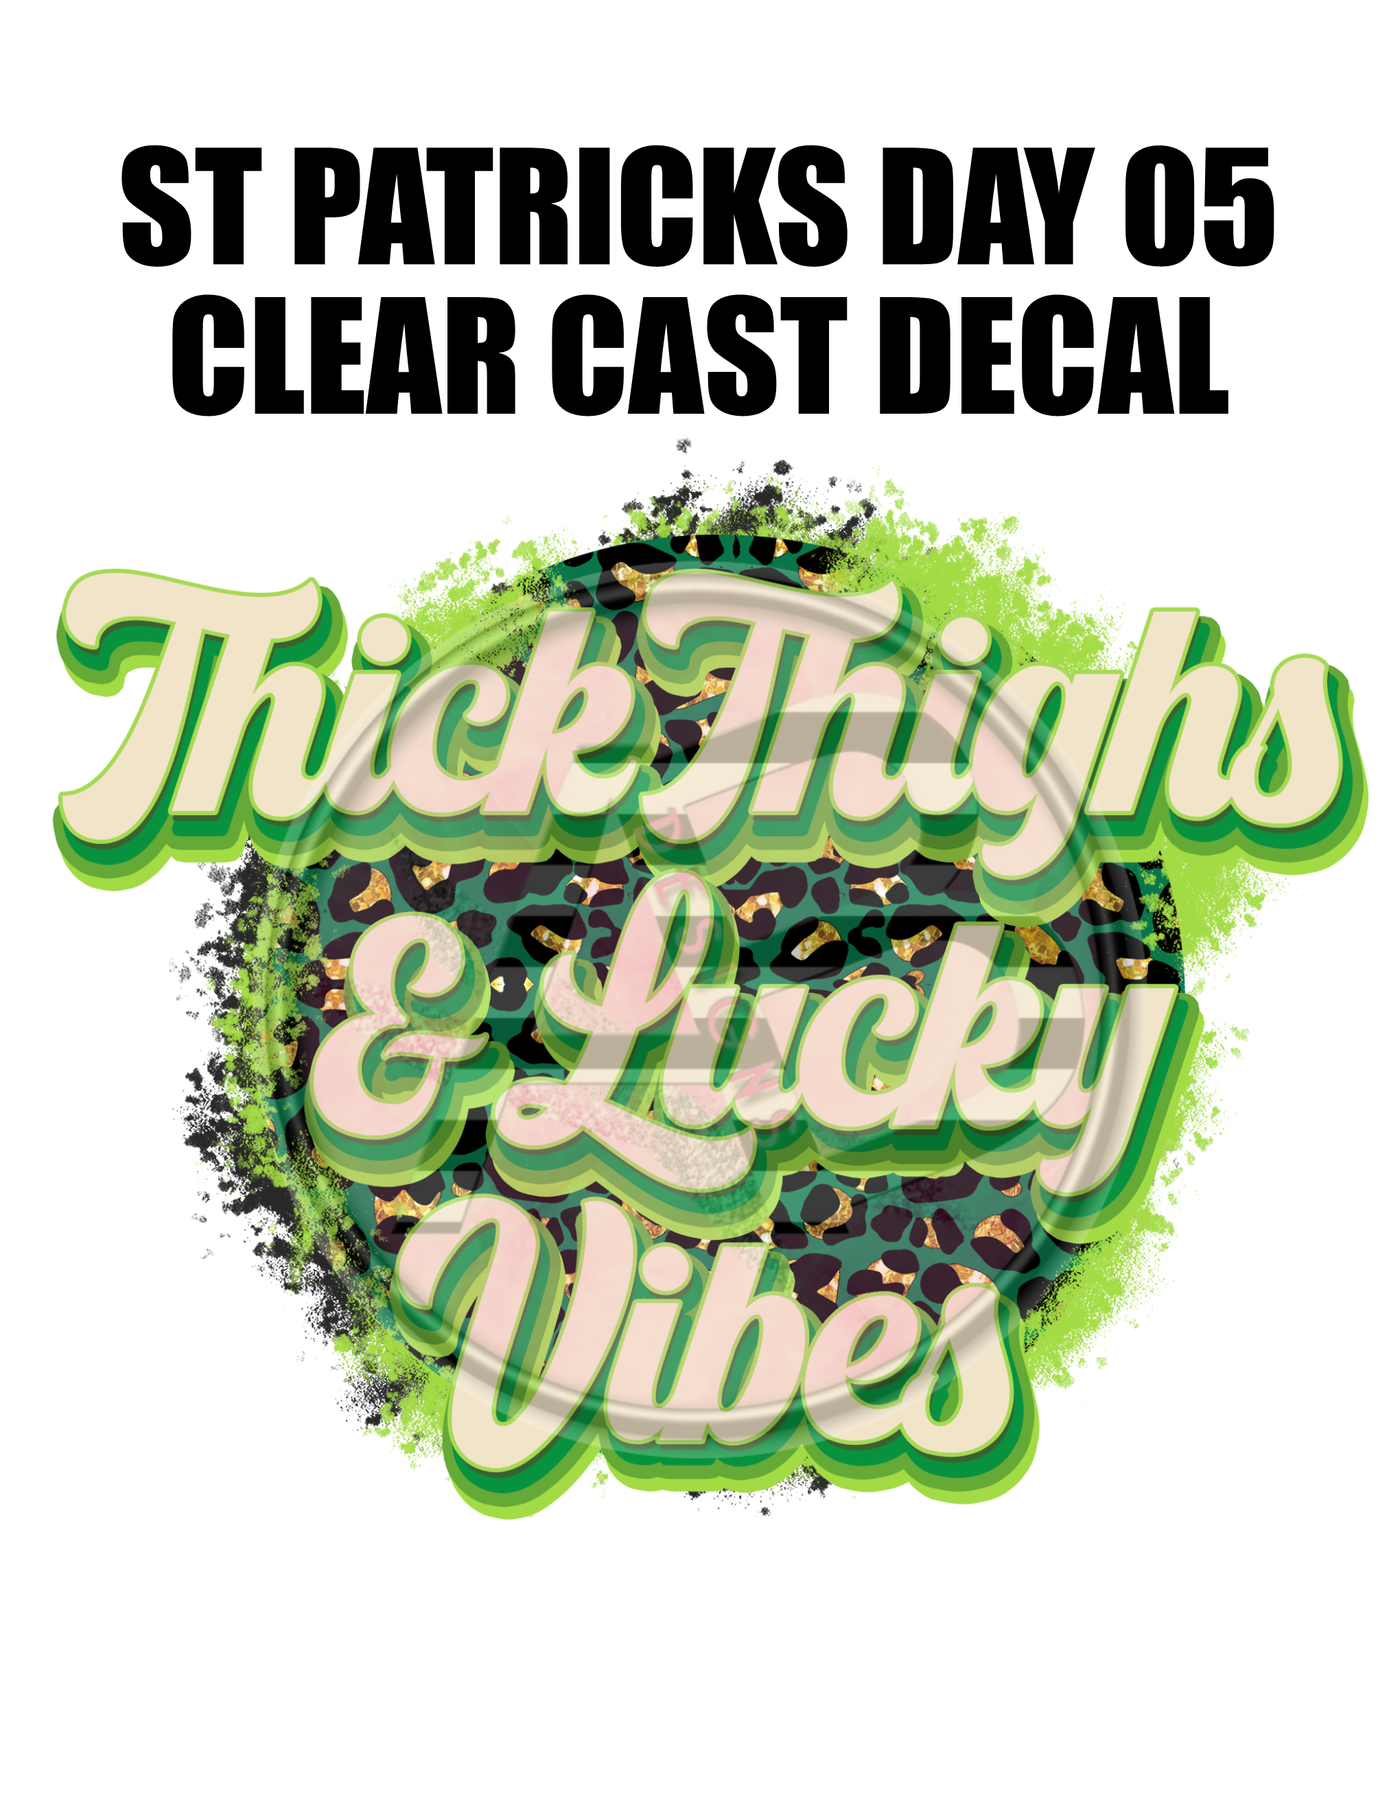 St. Patrick's Day 05 - Clear Cast Decal